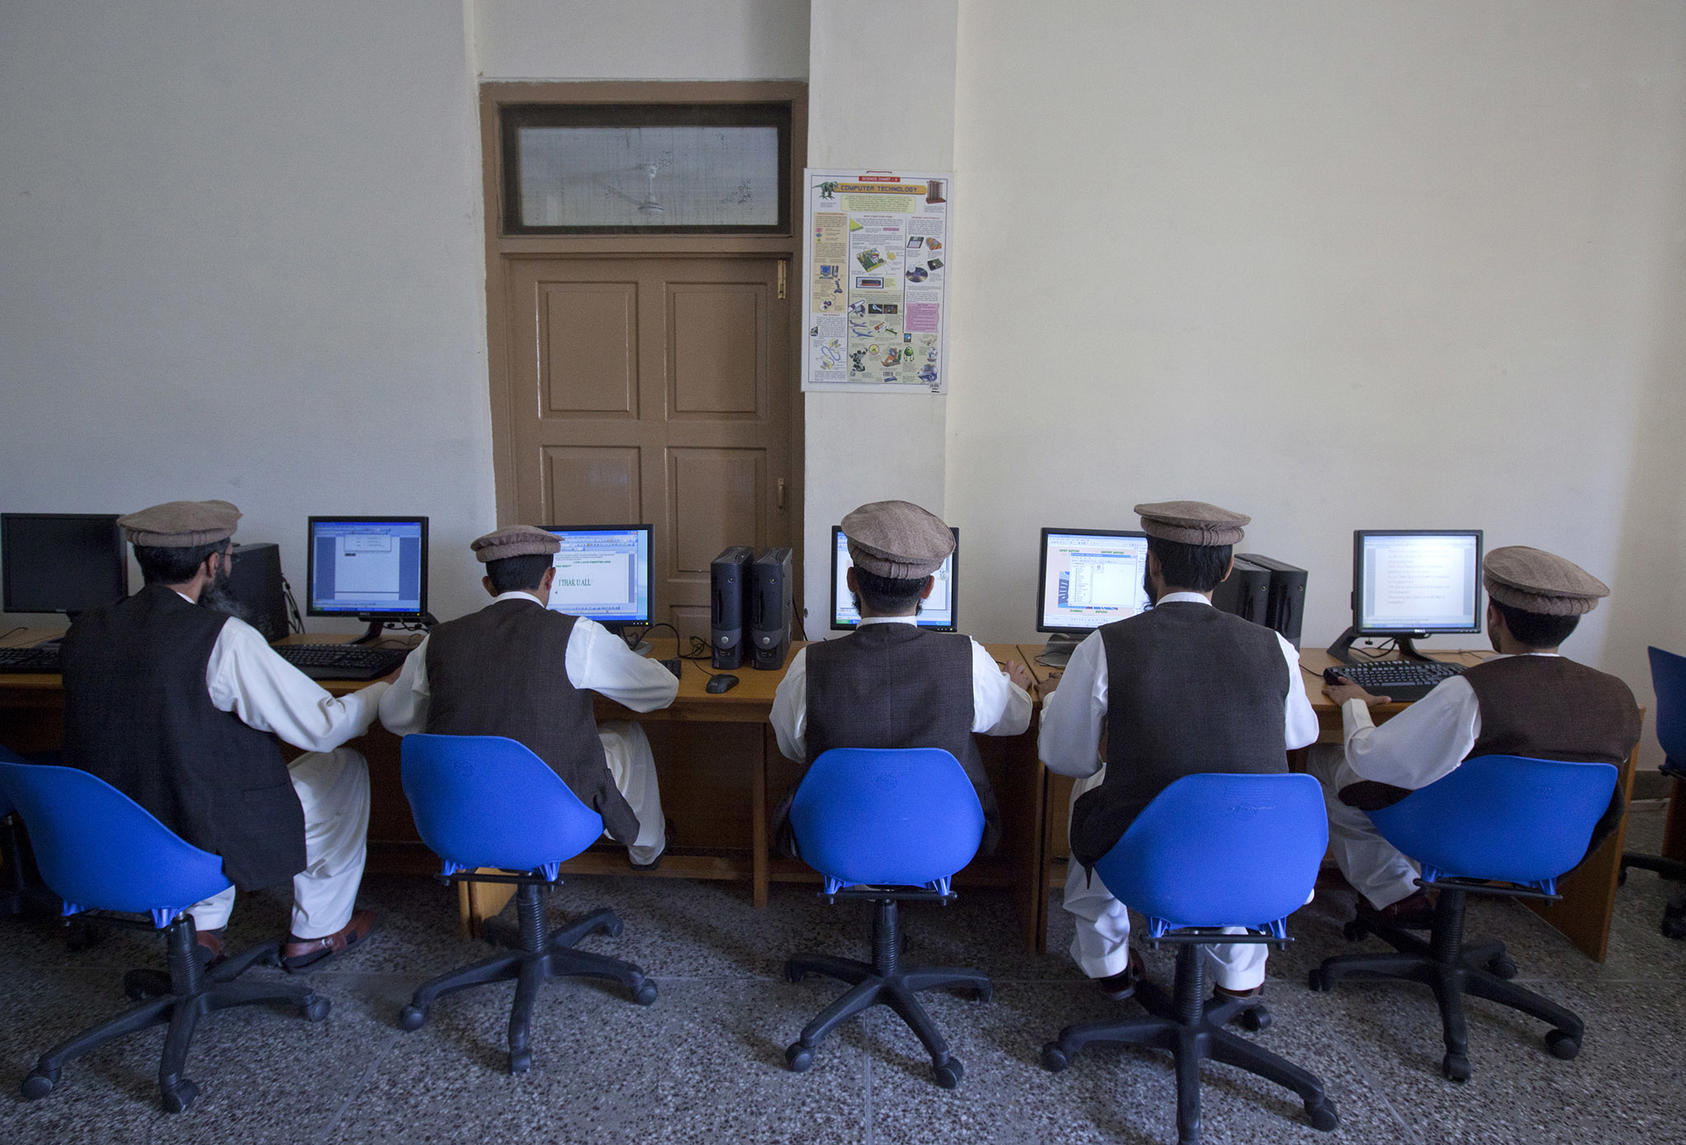 Men learn to use computers in a classroom at Pakistan’s Mishal Deradicalization and Emancipation Program in April 2012. (Mian Khursheed/Reuters)